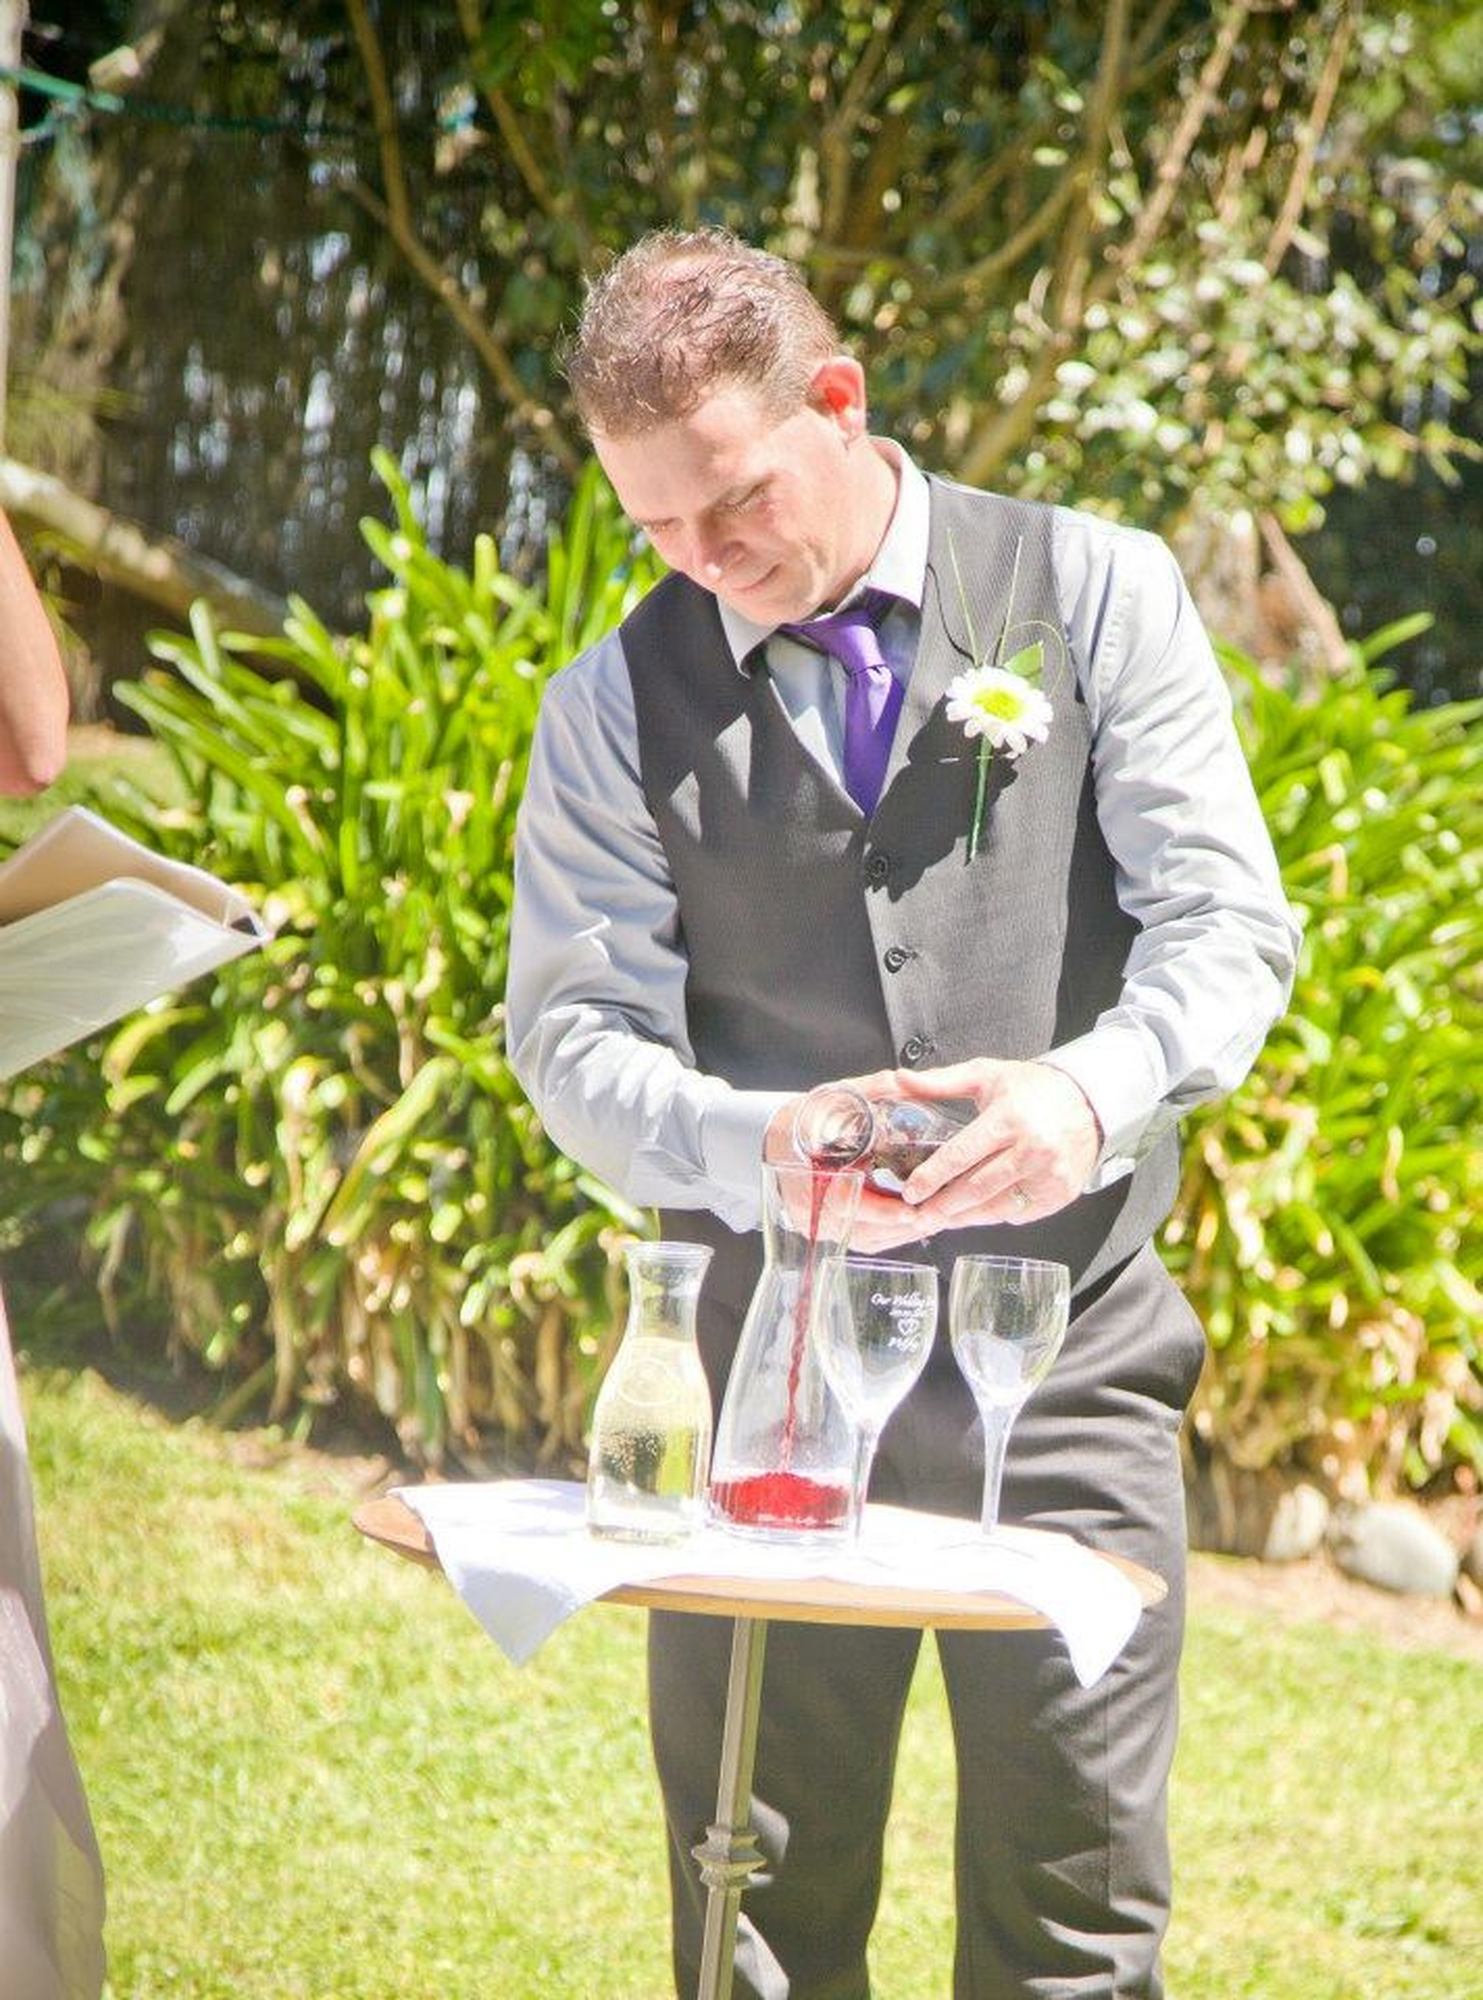 First the Groom Pours the Red Wine